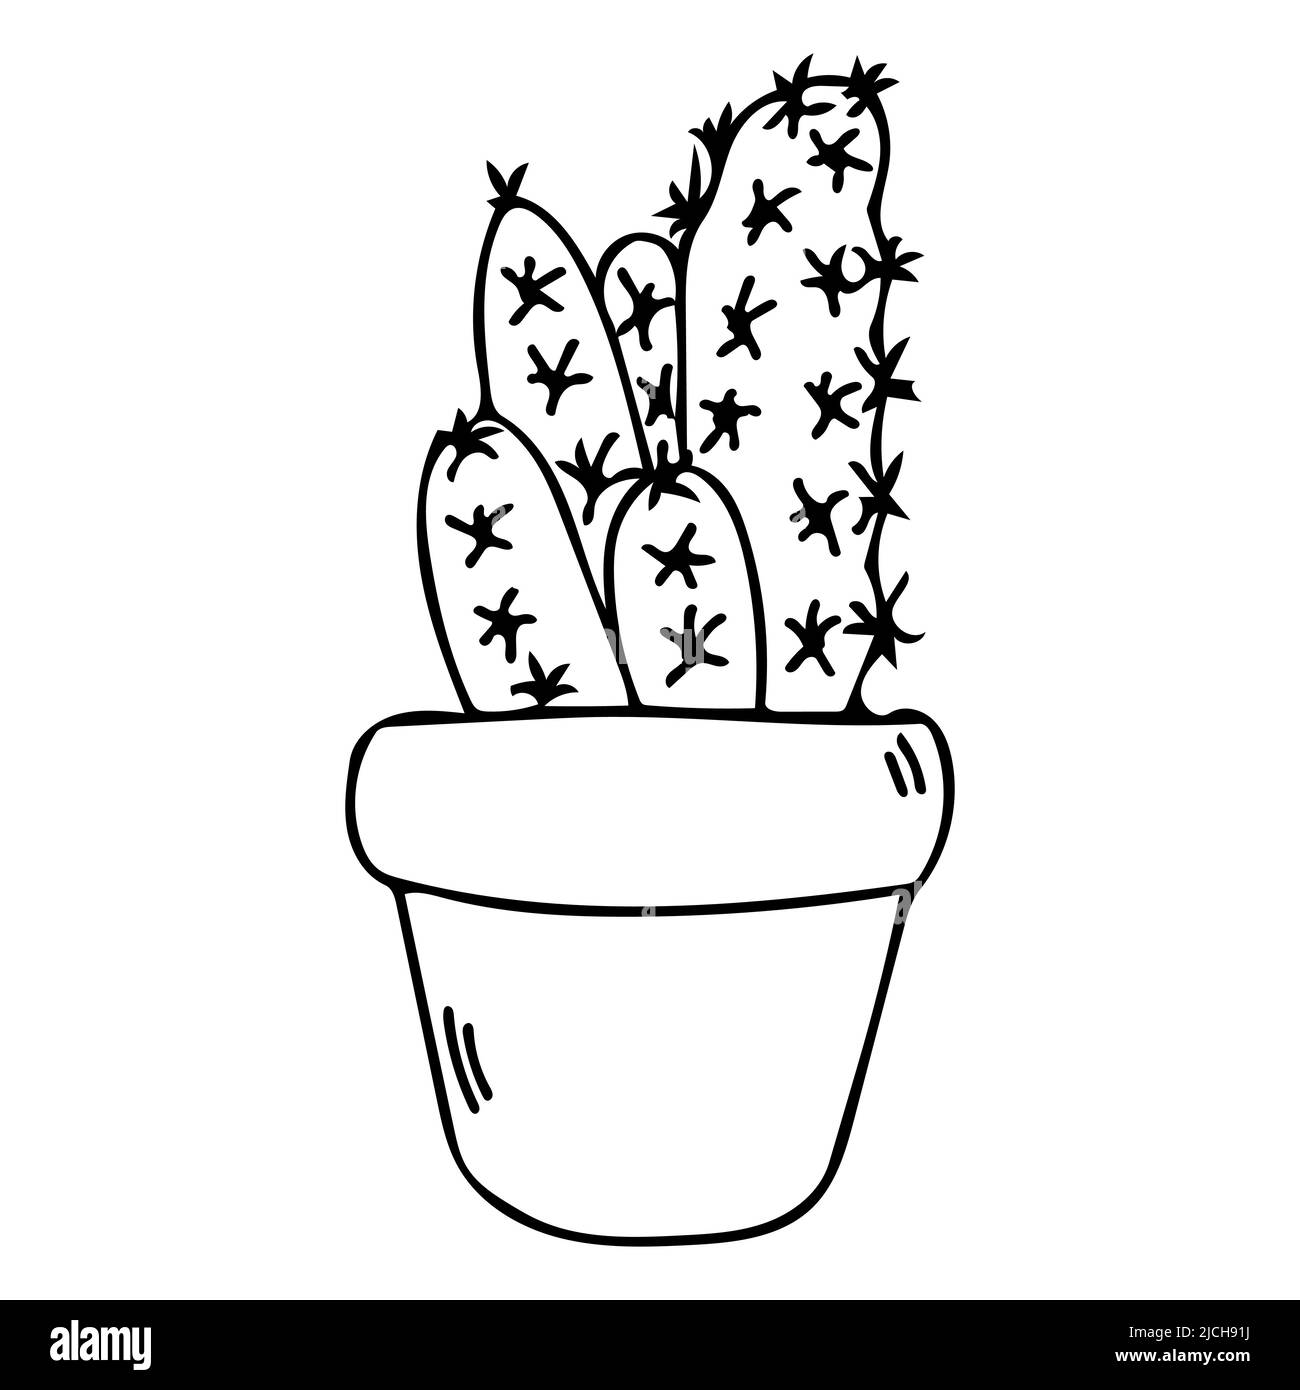 Cactus in pot vector sketch icon. Cute black succulent outline illustration. Mexican house plant in flowerpot line art. Stock Vector